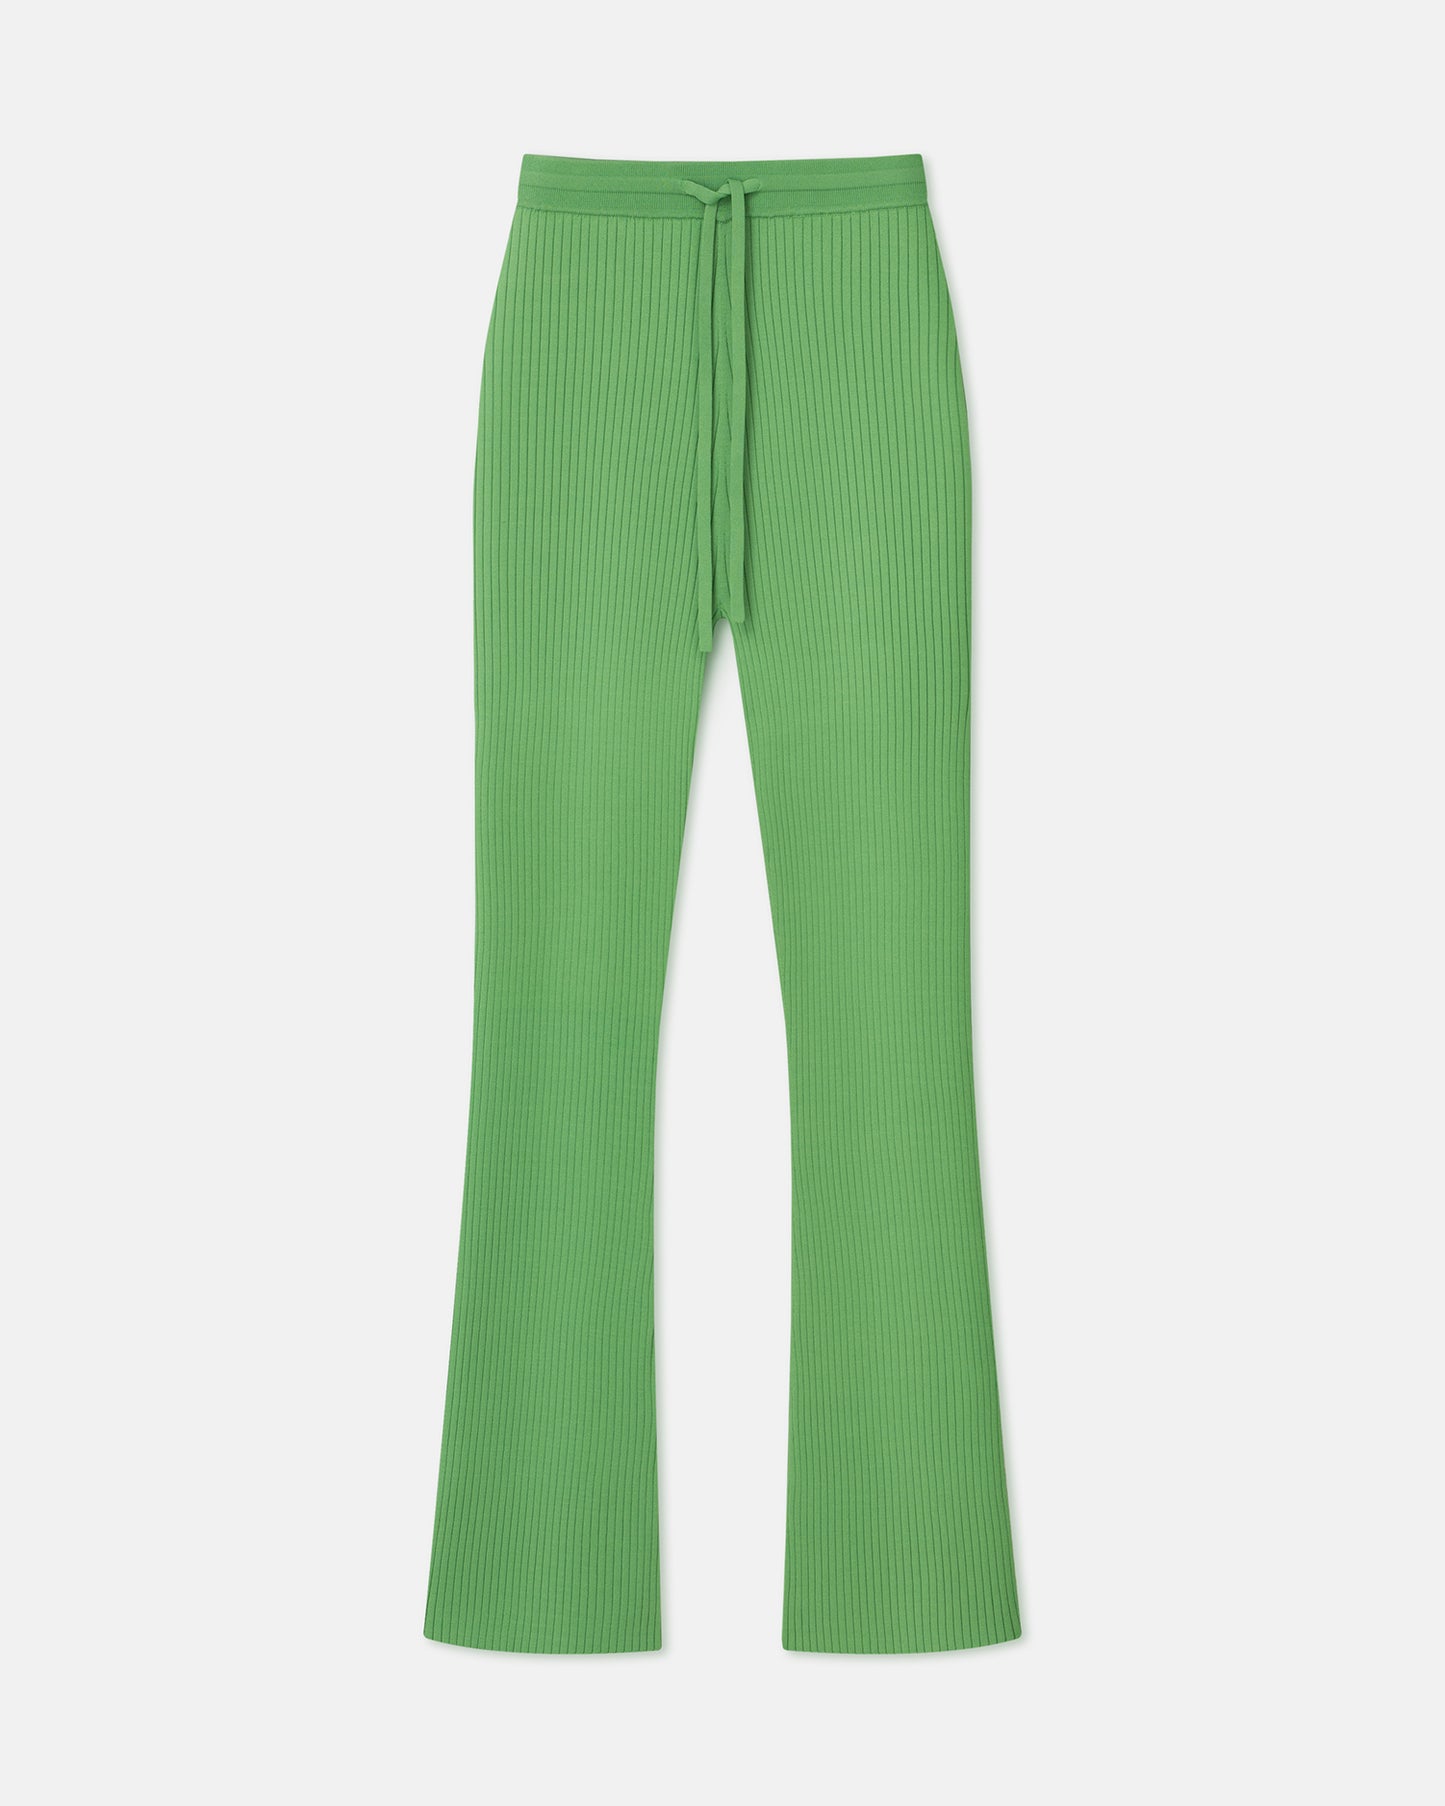 Cornelie - Ribbed-Knit Pants - Green